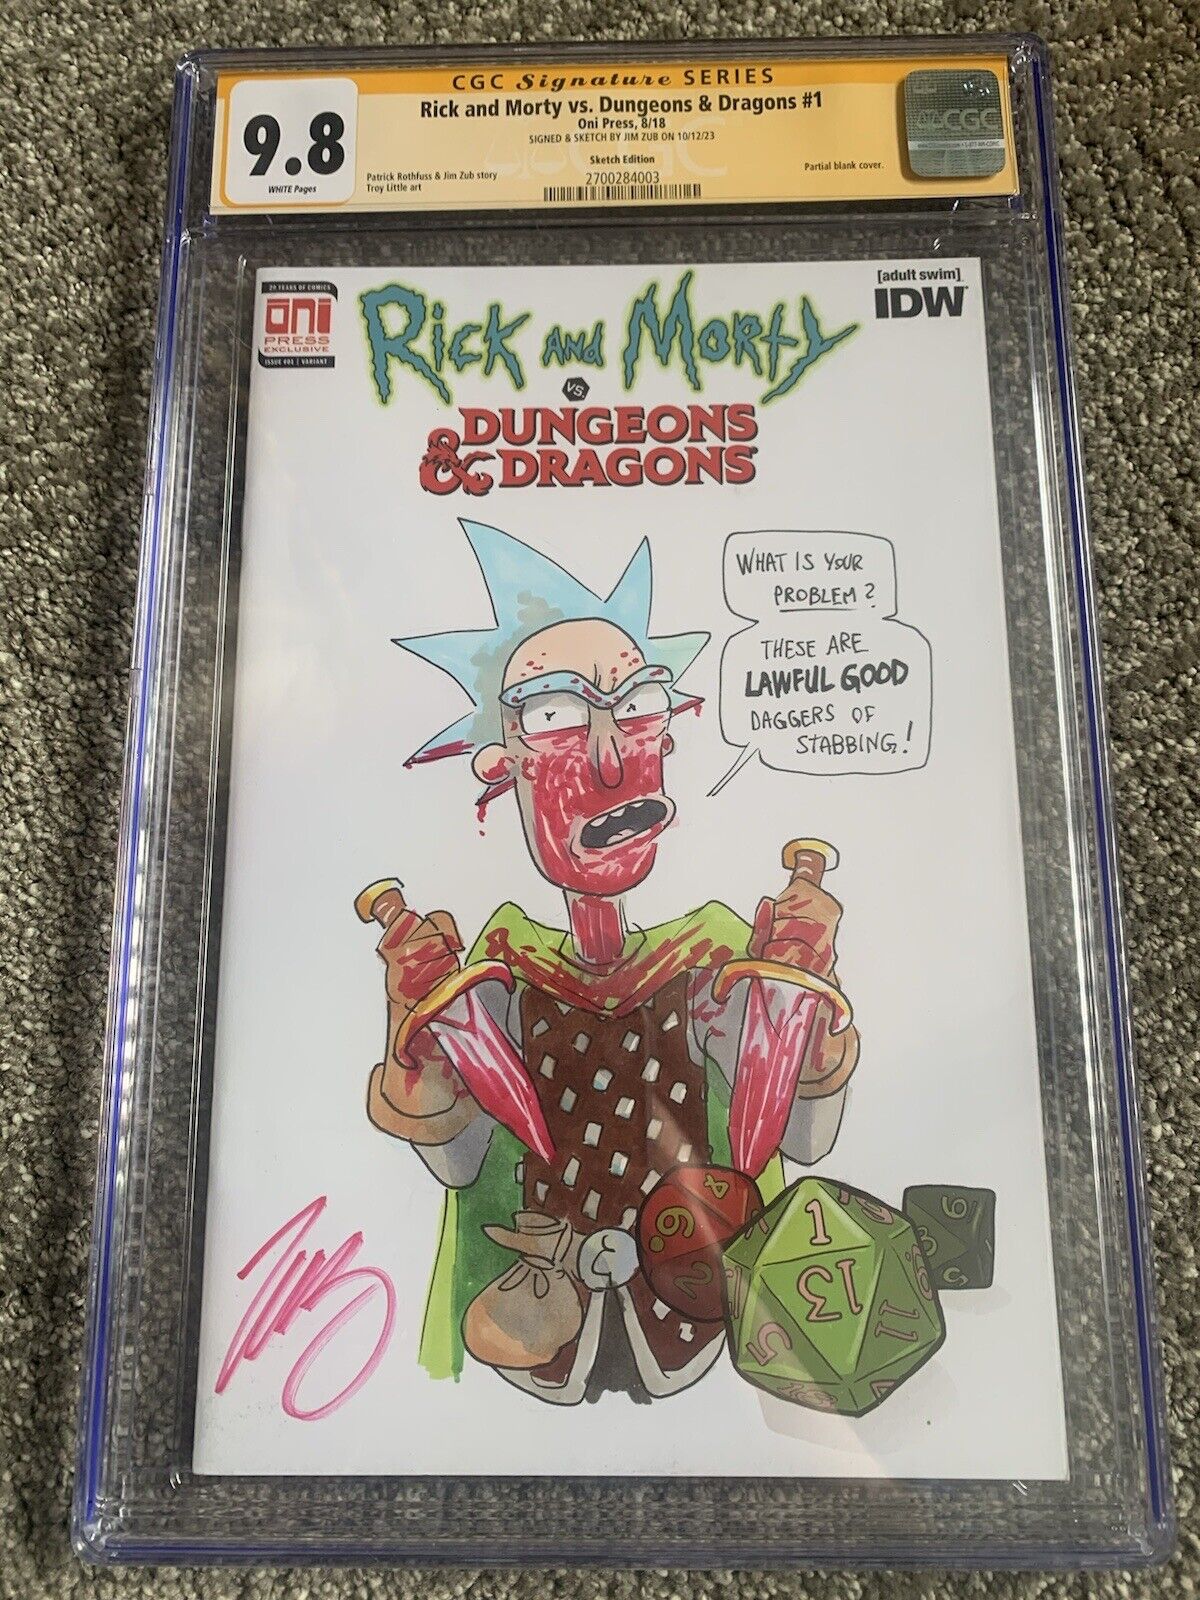 Rick and Morty vs Dungeons & Dragons 1 Signed Sketch Remark Jim Zub CGC 9.8 🔥